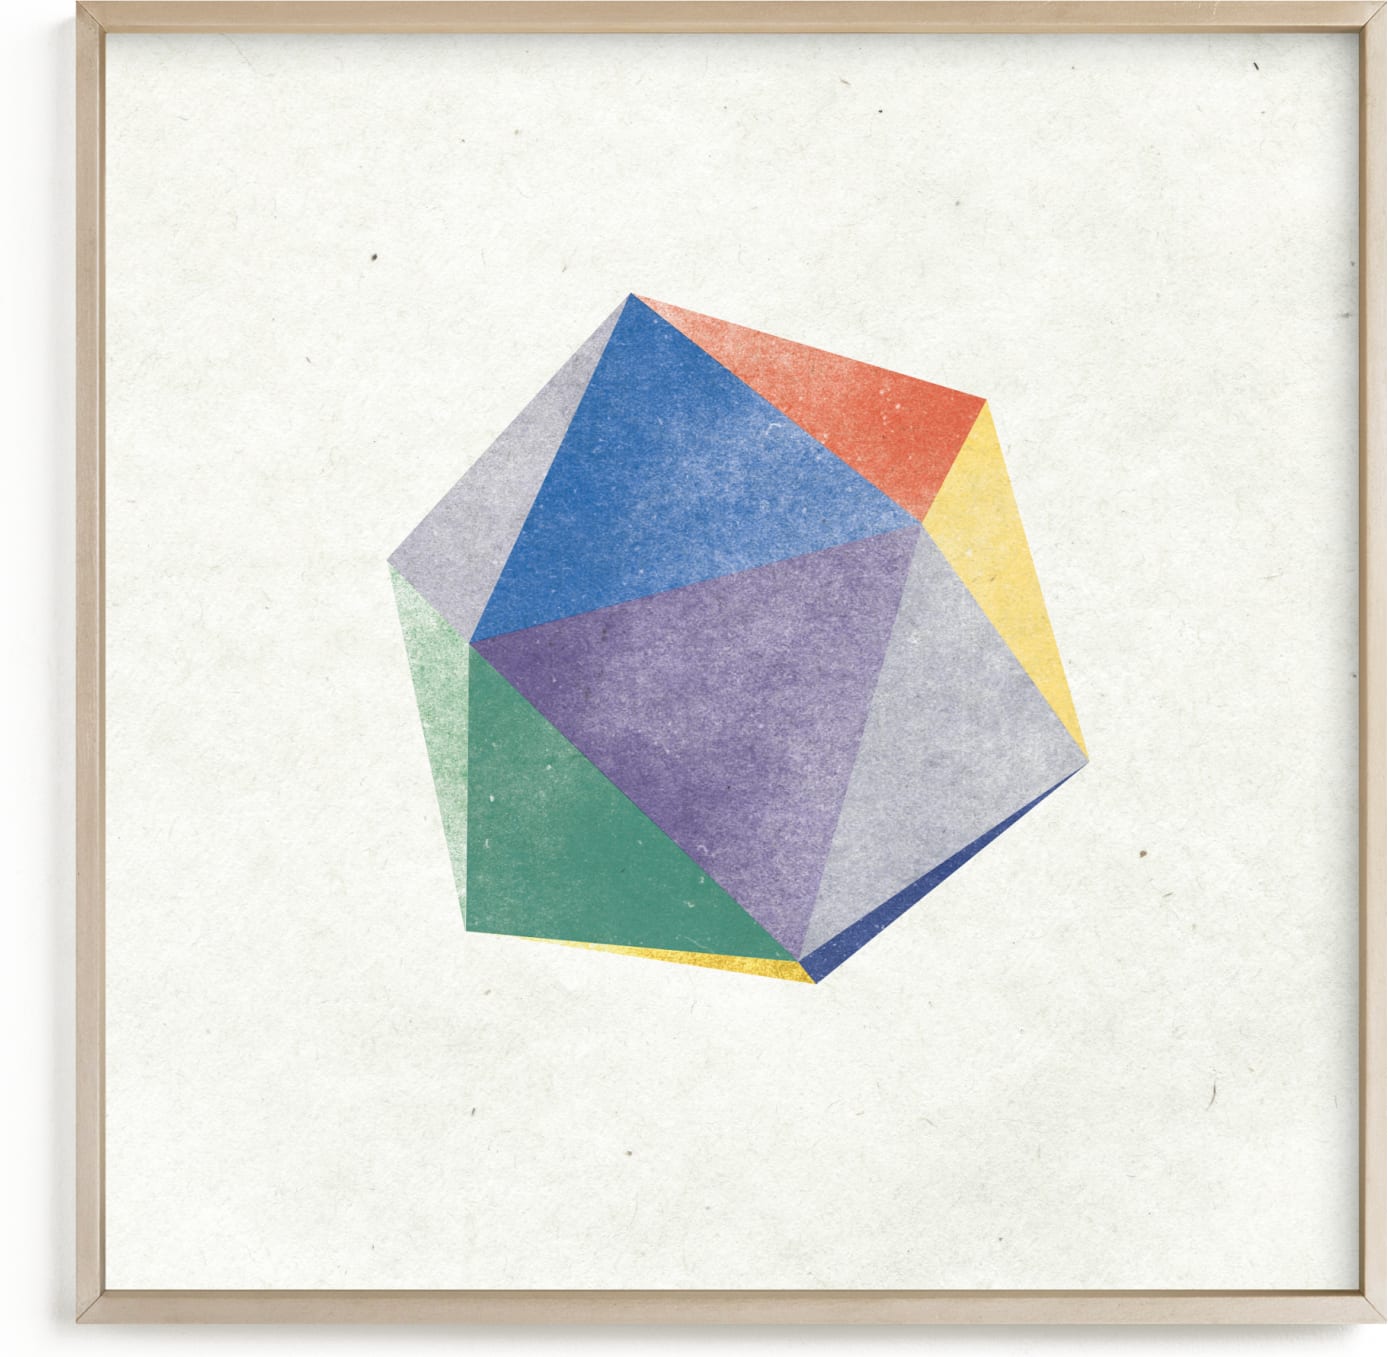 This is a colorful kids wall art by Sumak Studio called dreamy icosahedron.